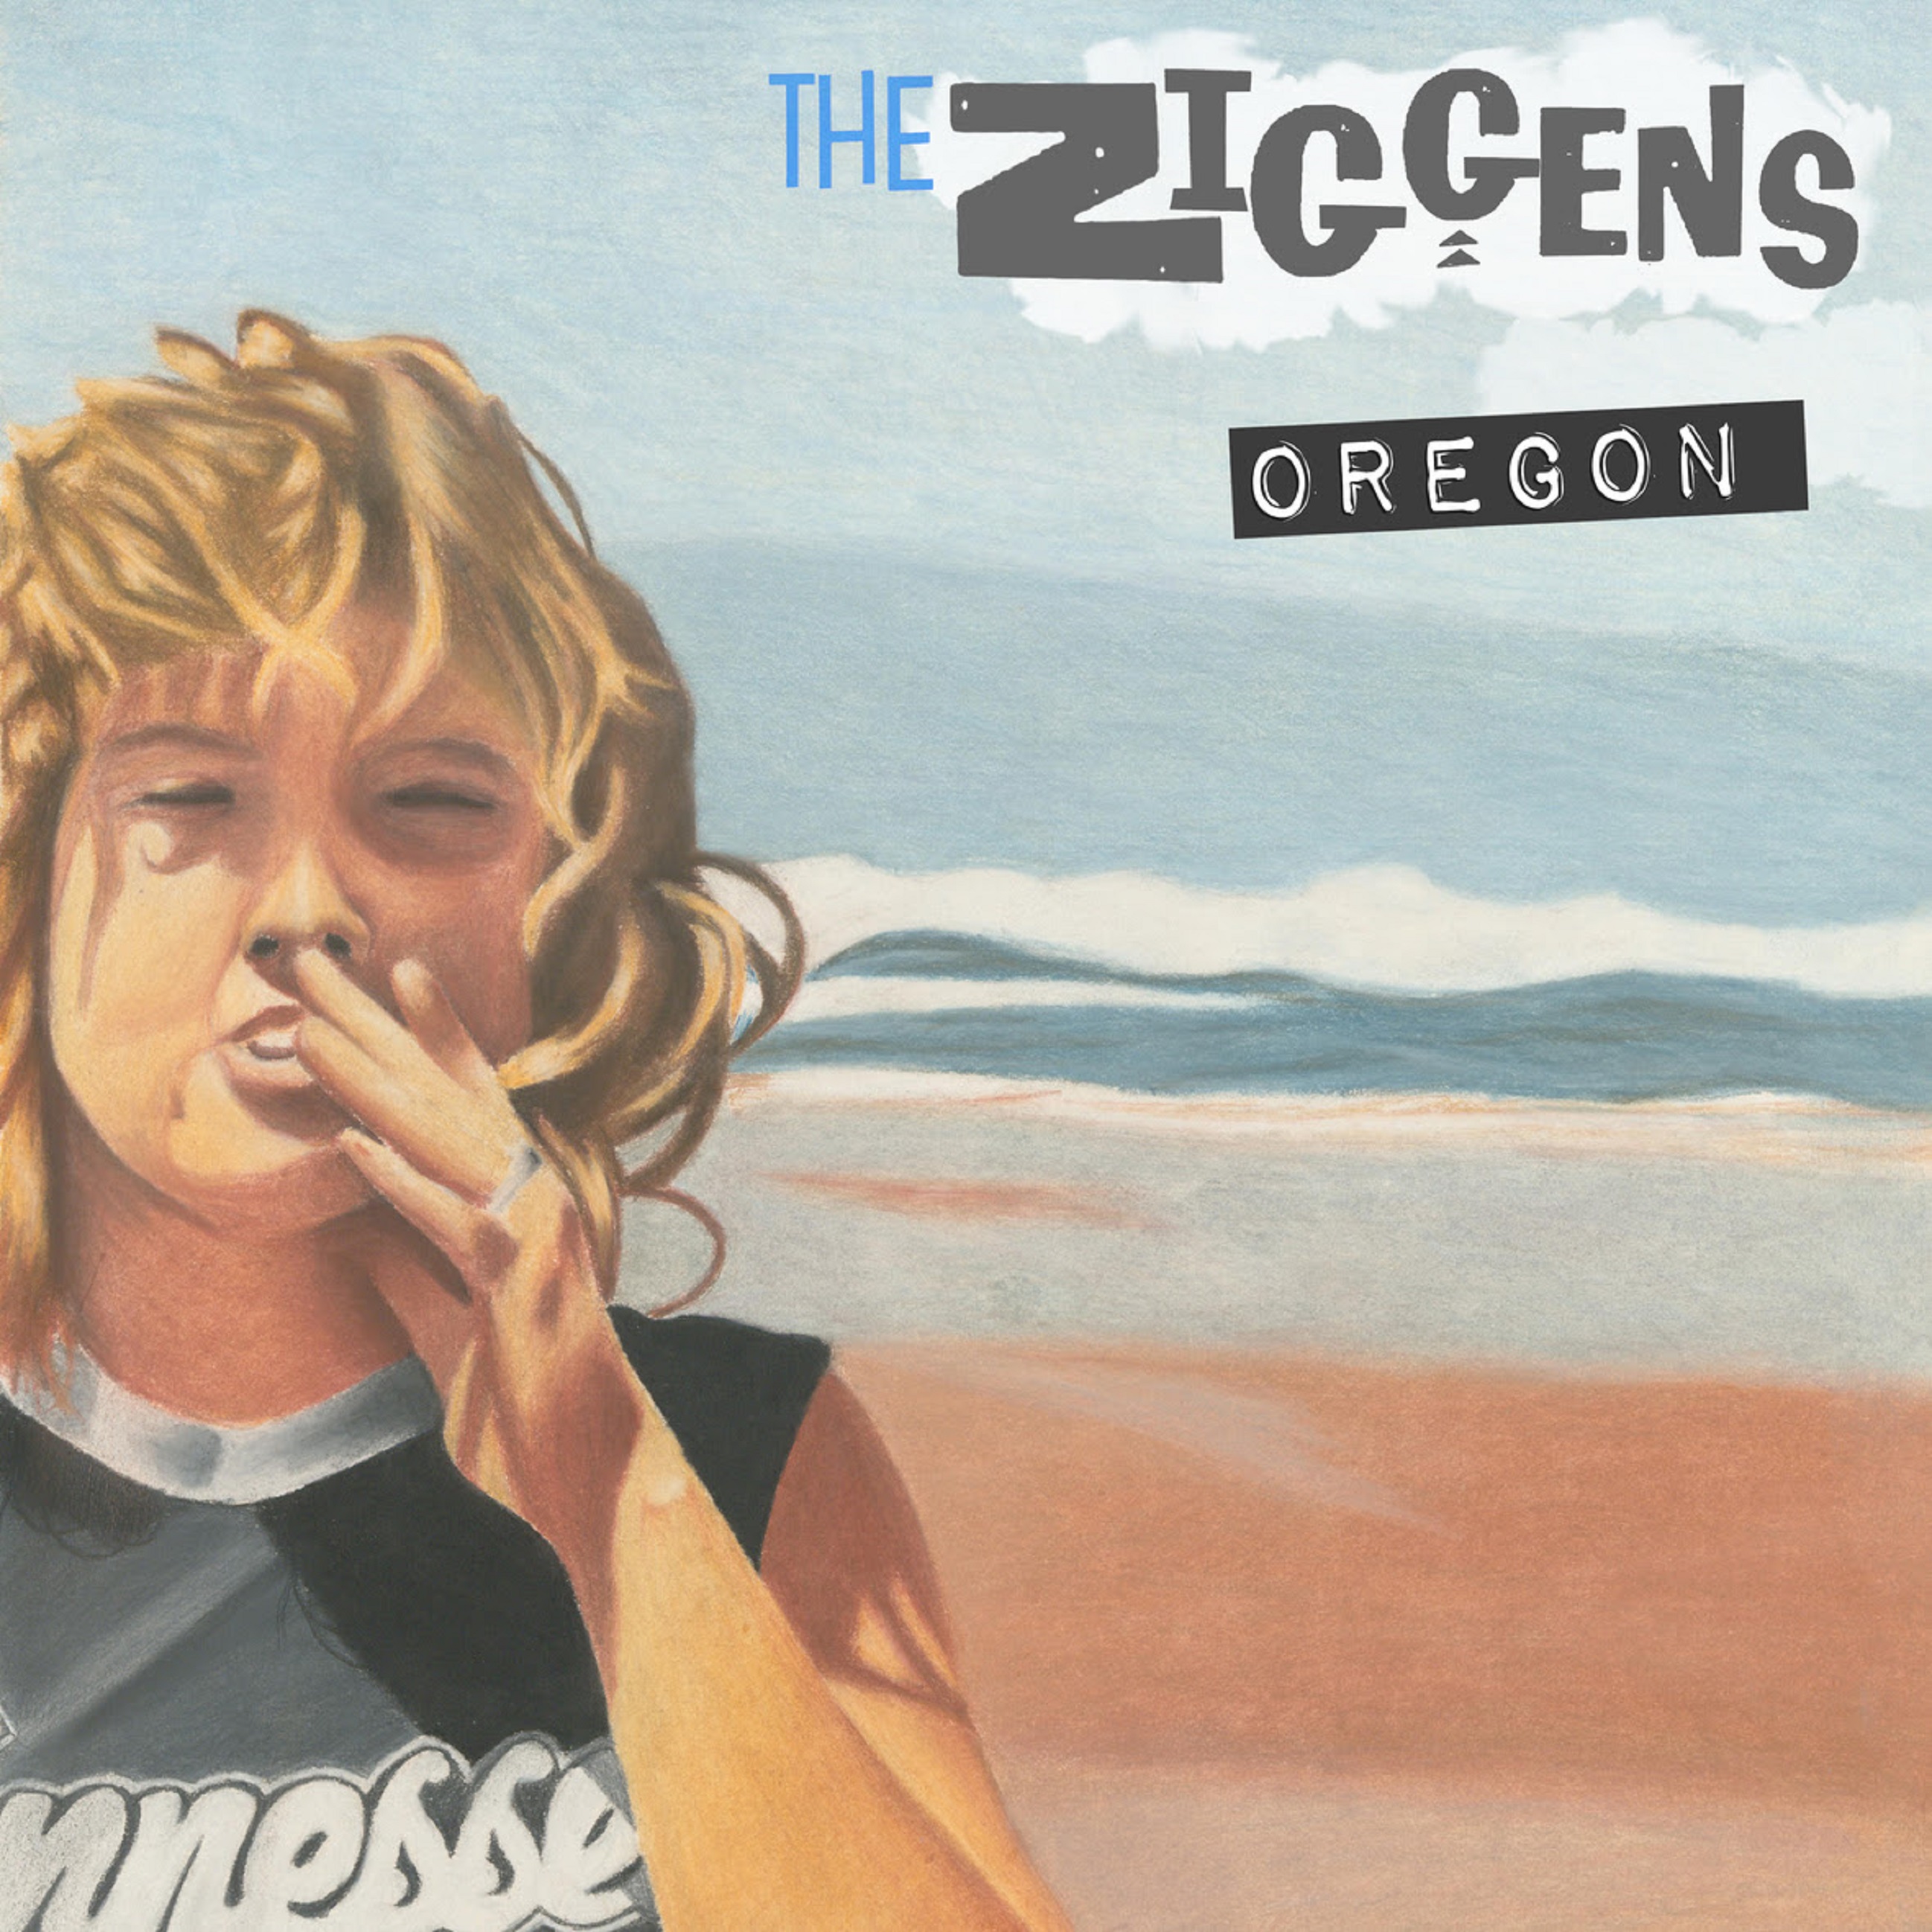 Sublime's Favorite Band The Ziggens Just Released Their First Album in 19 Years